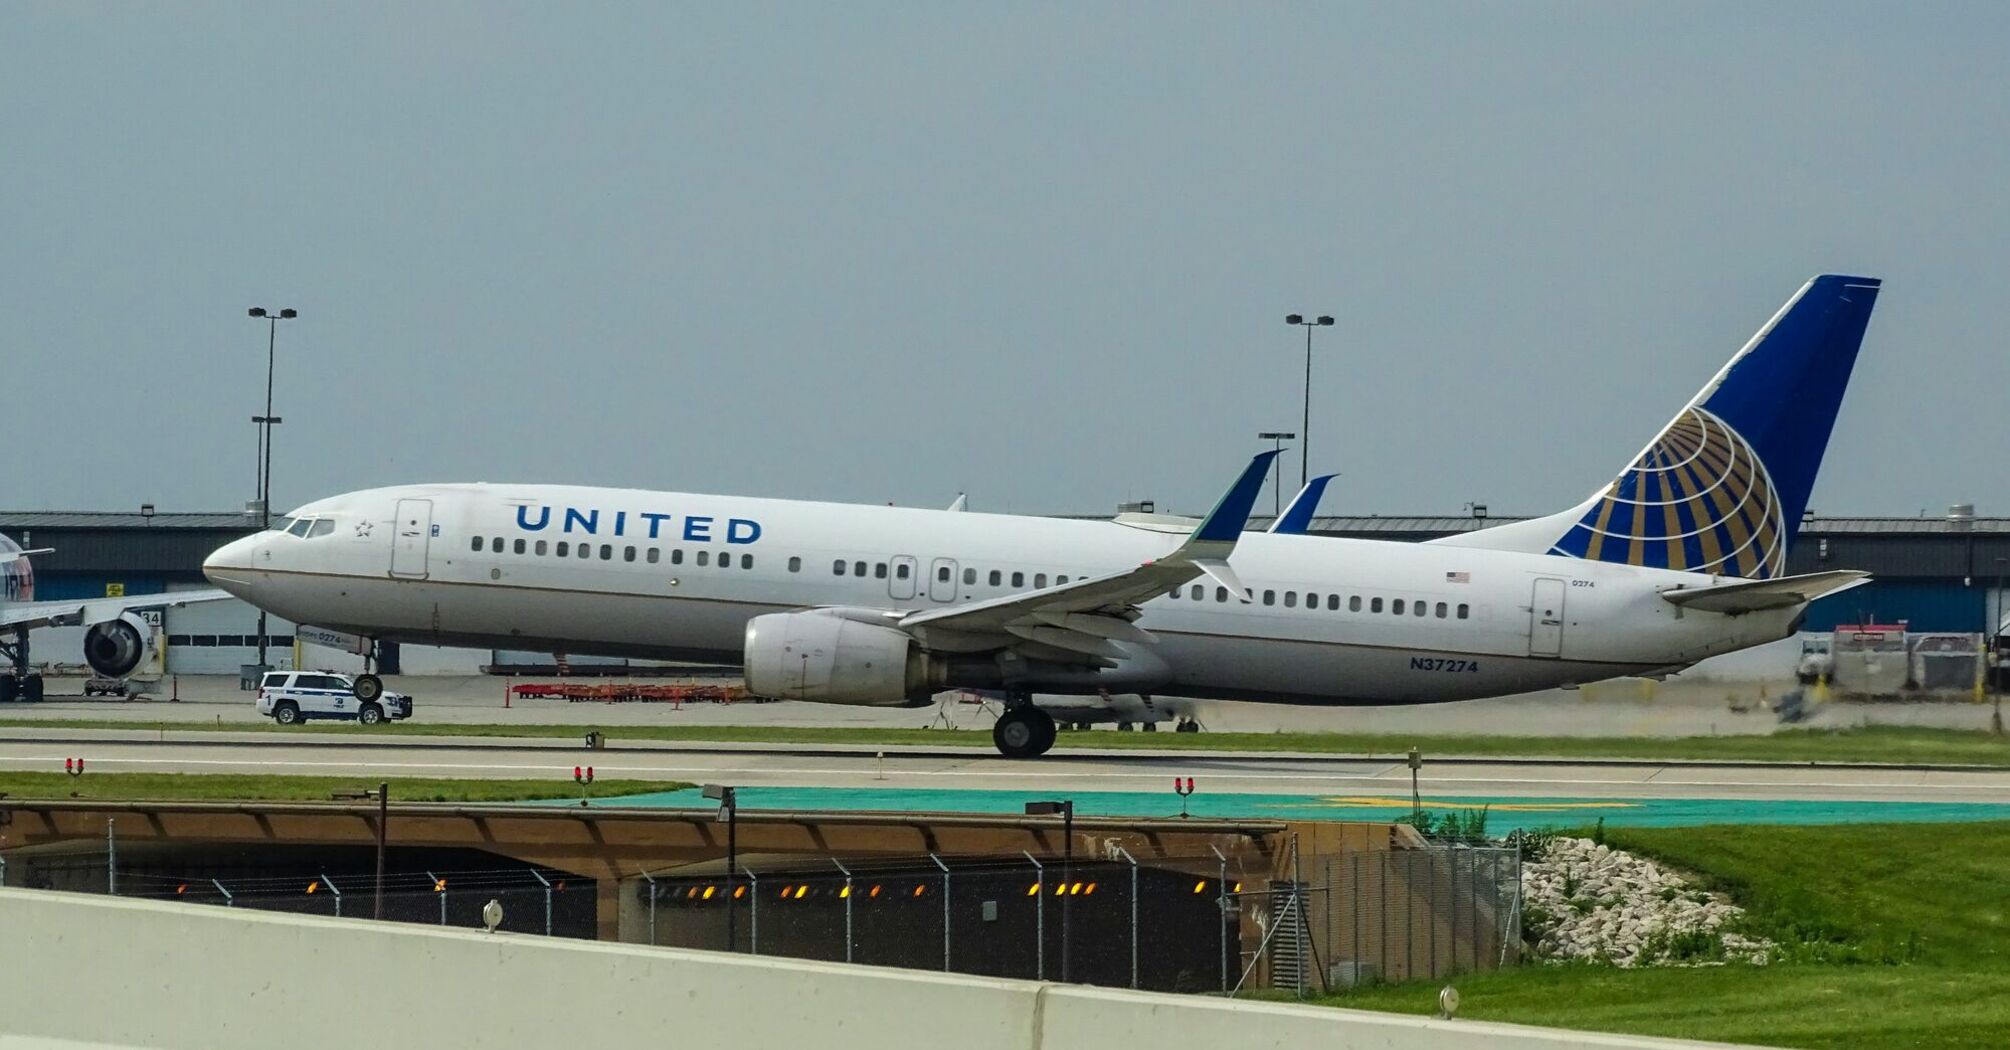 United airlines plane at the airport